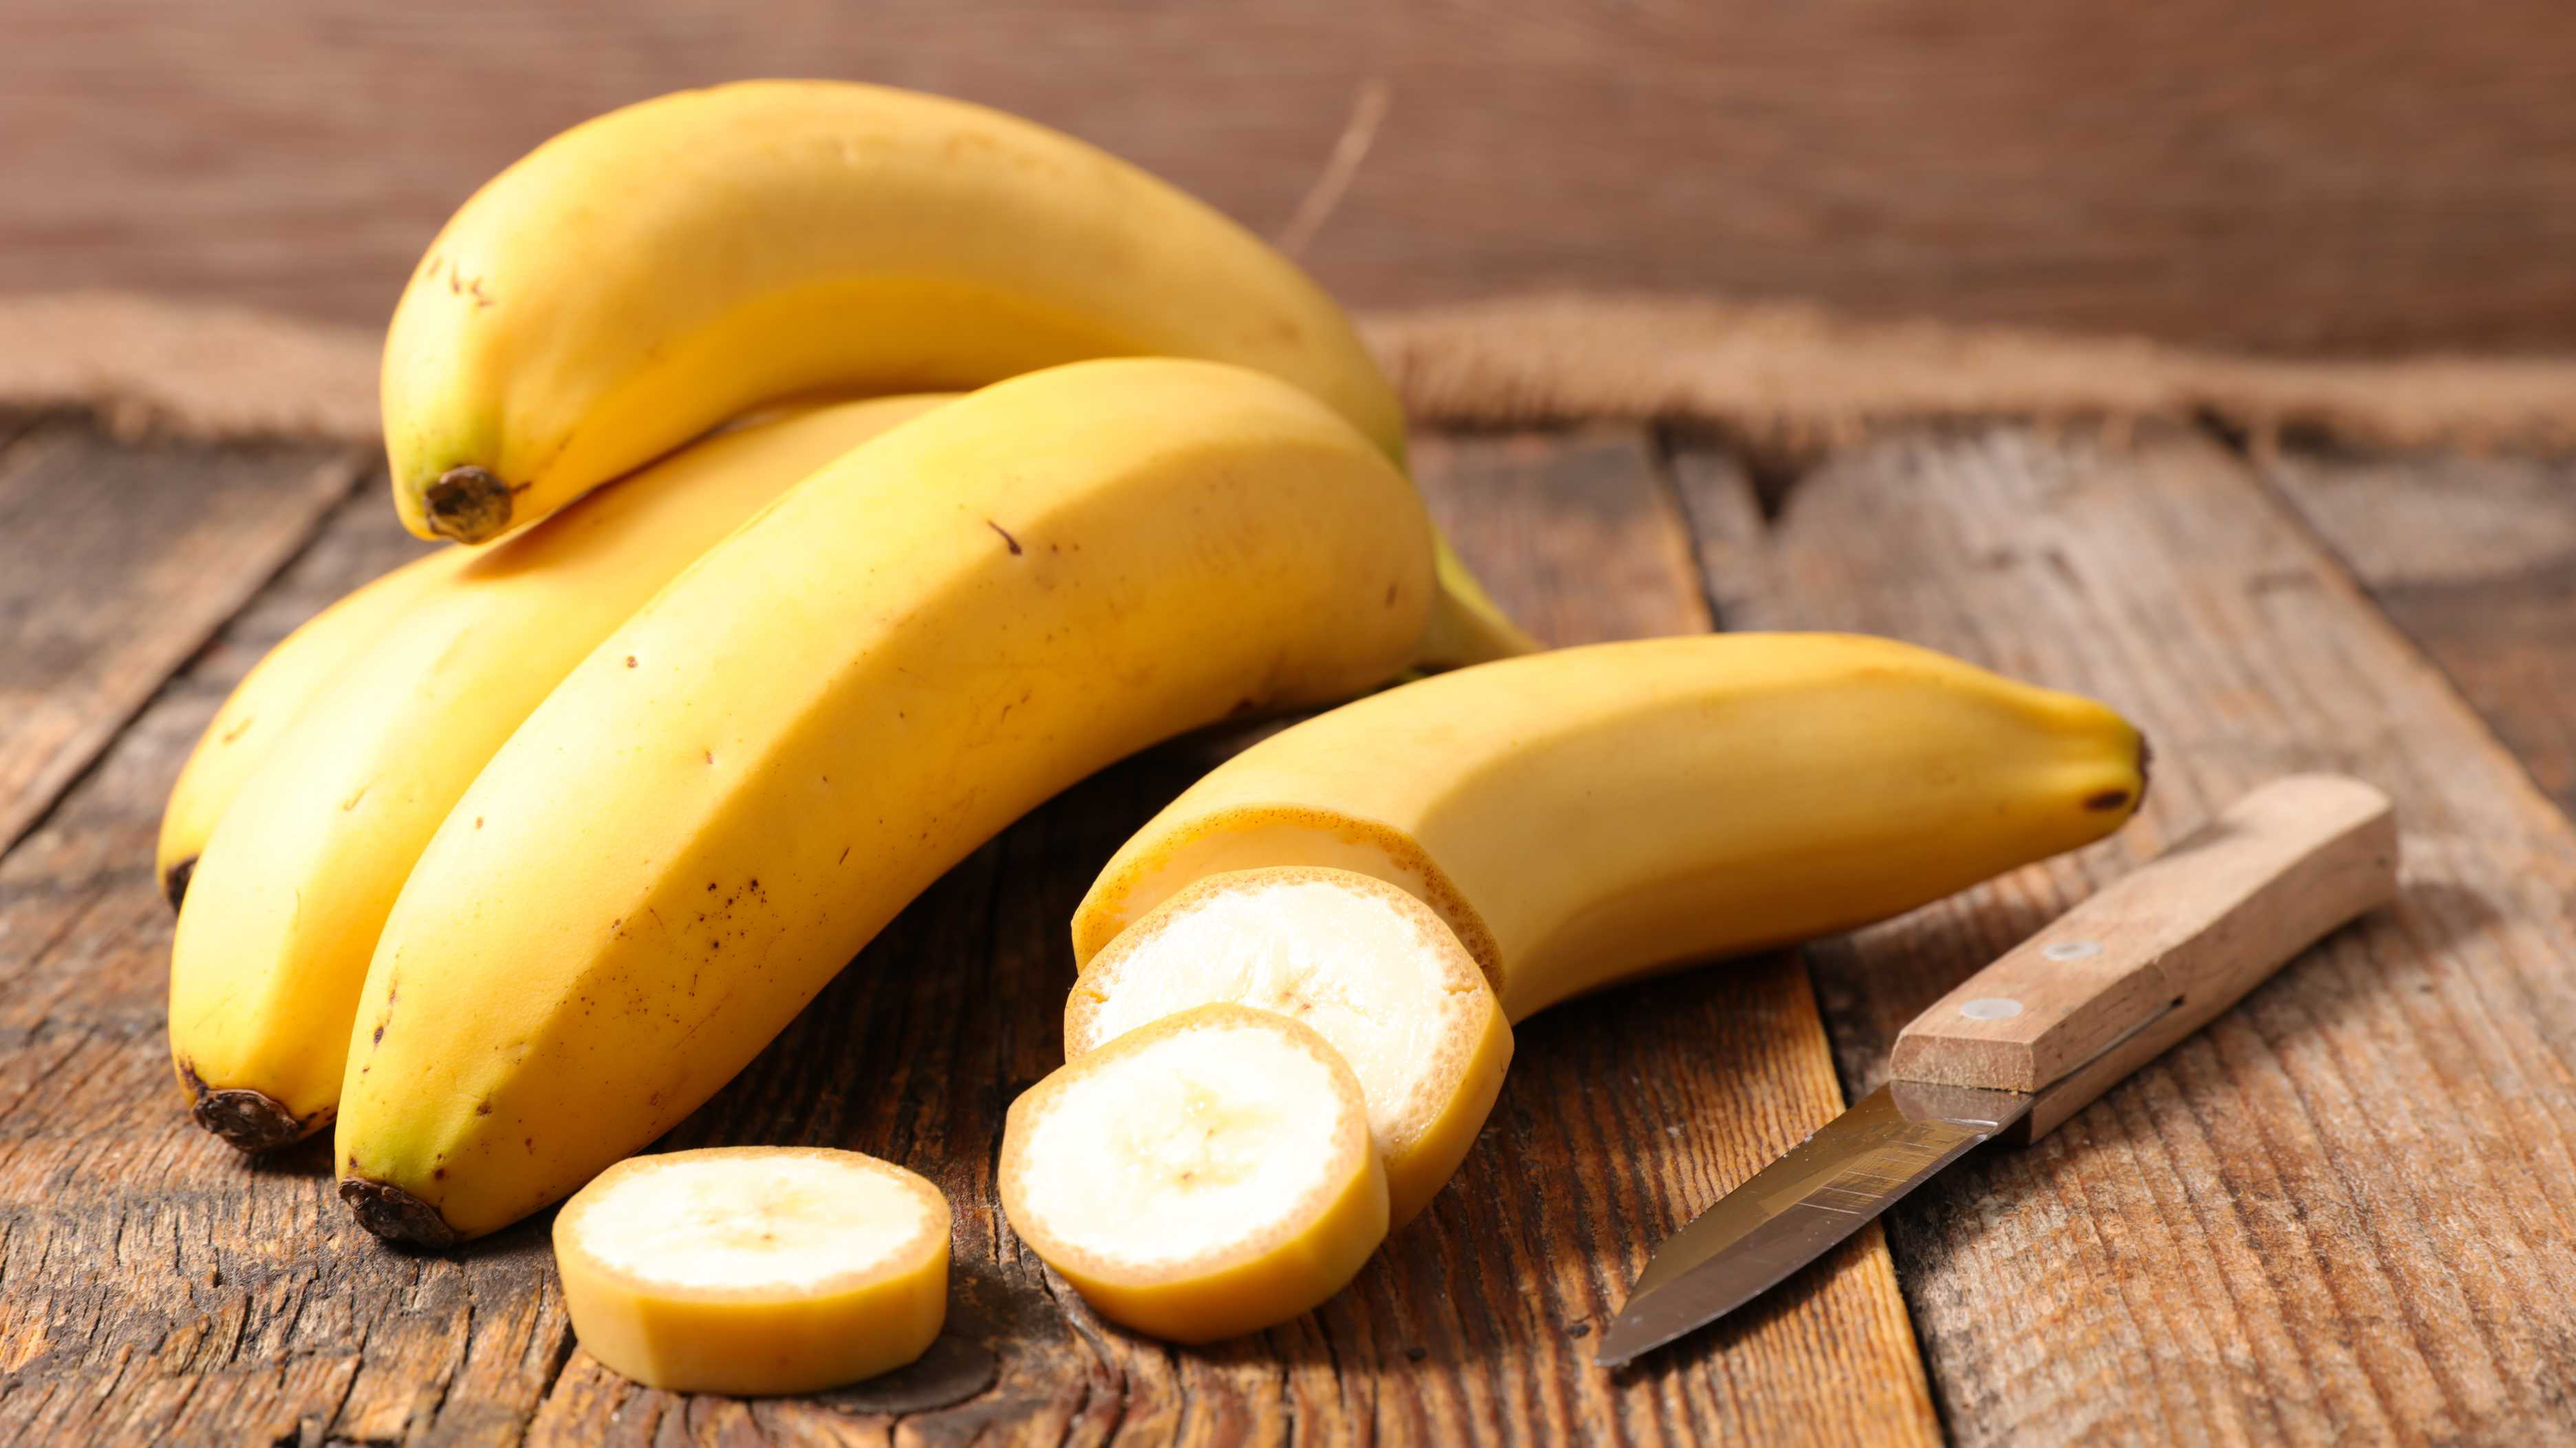 Professional Faqs: Are Bananas Good For You?